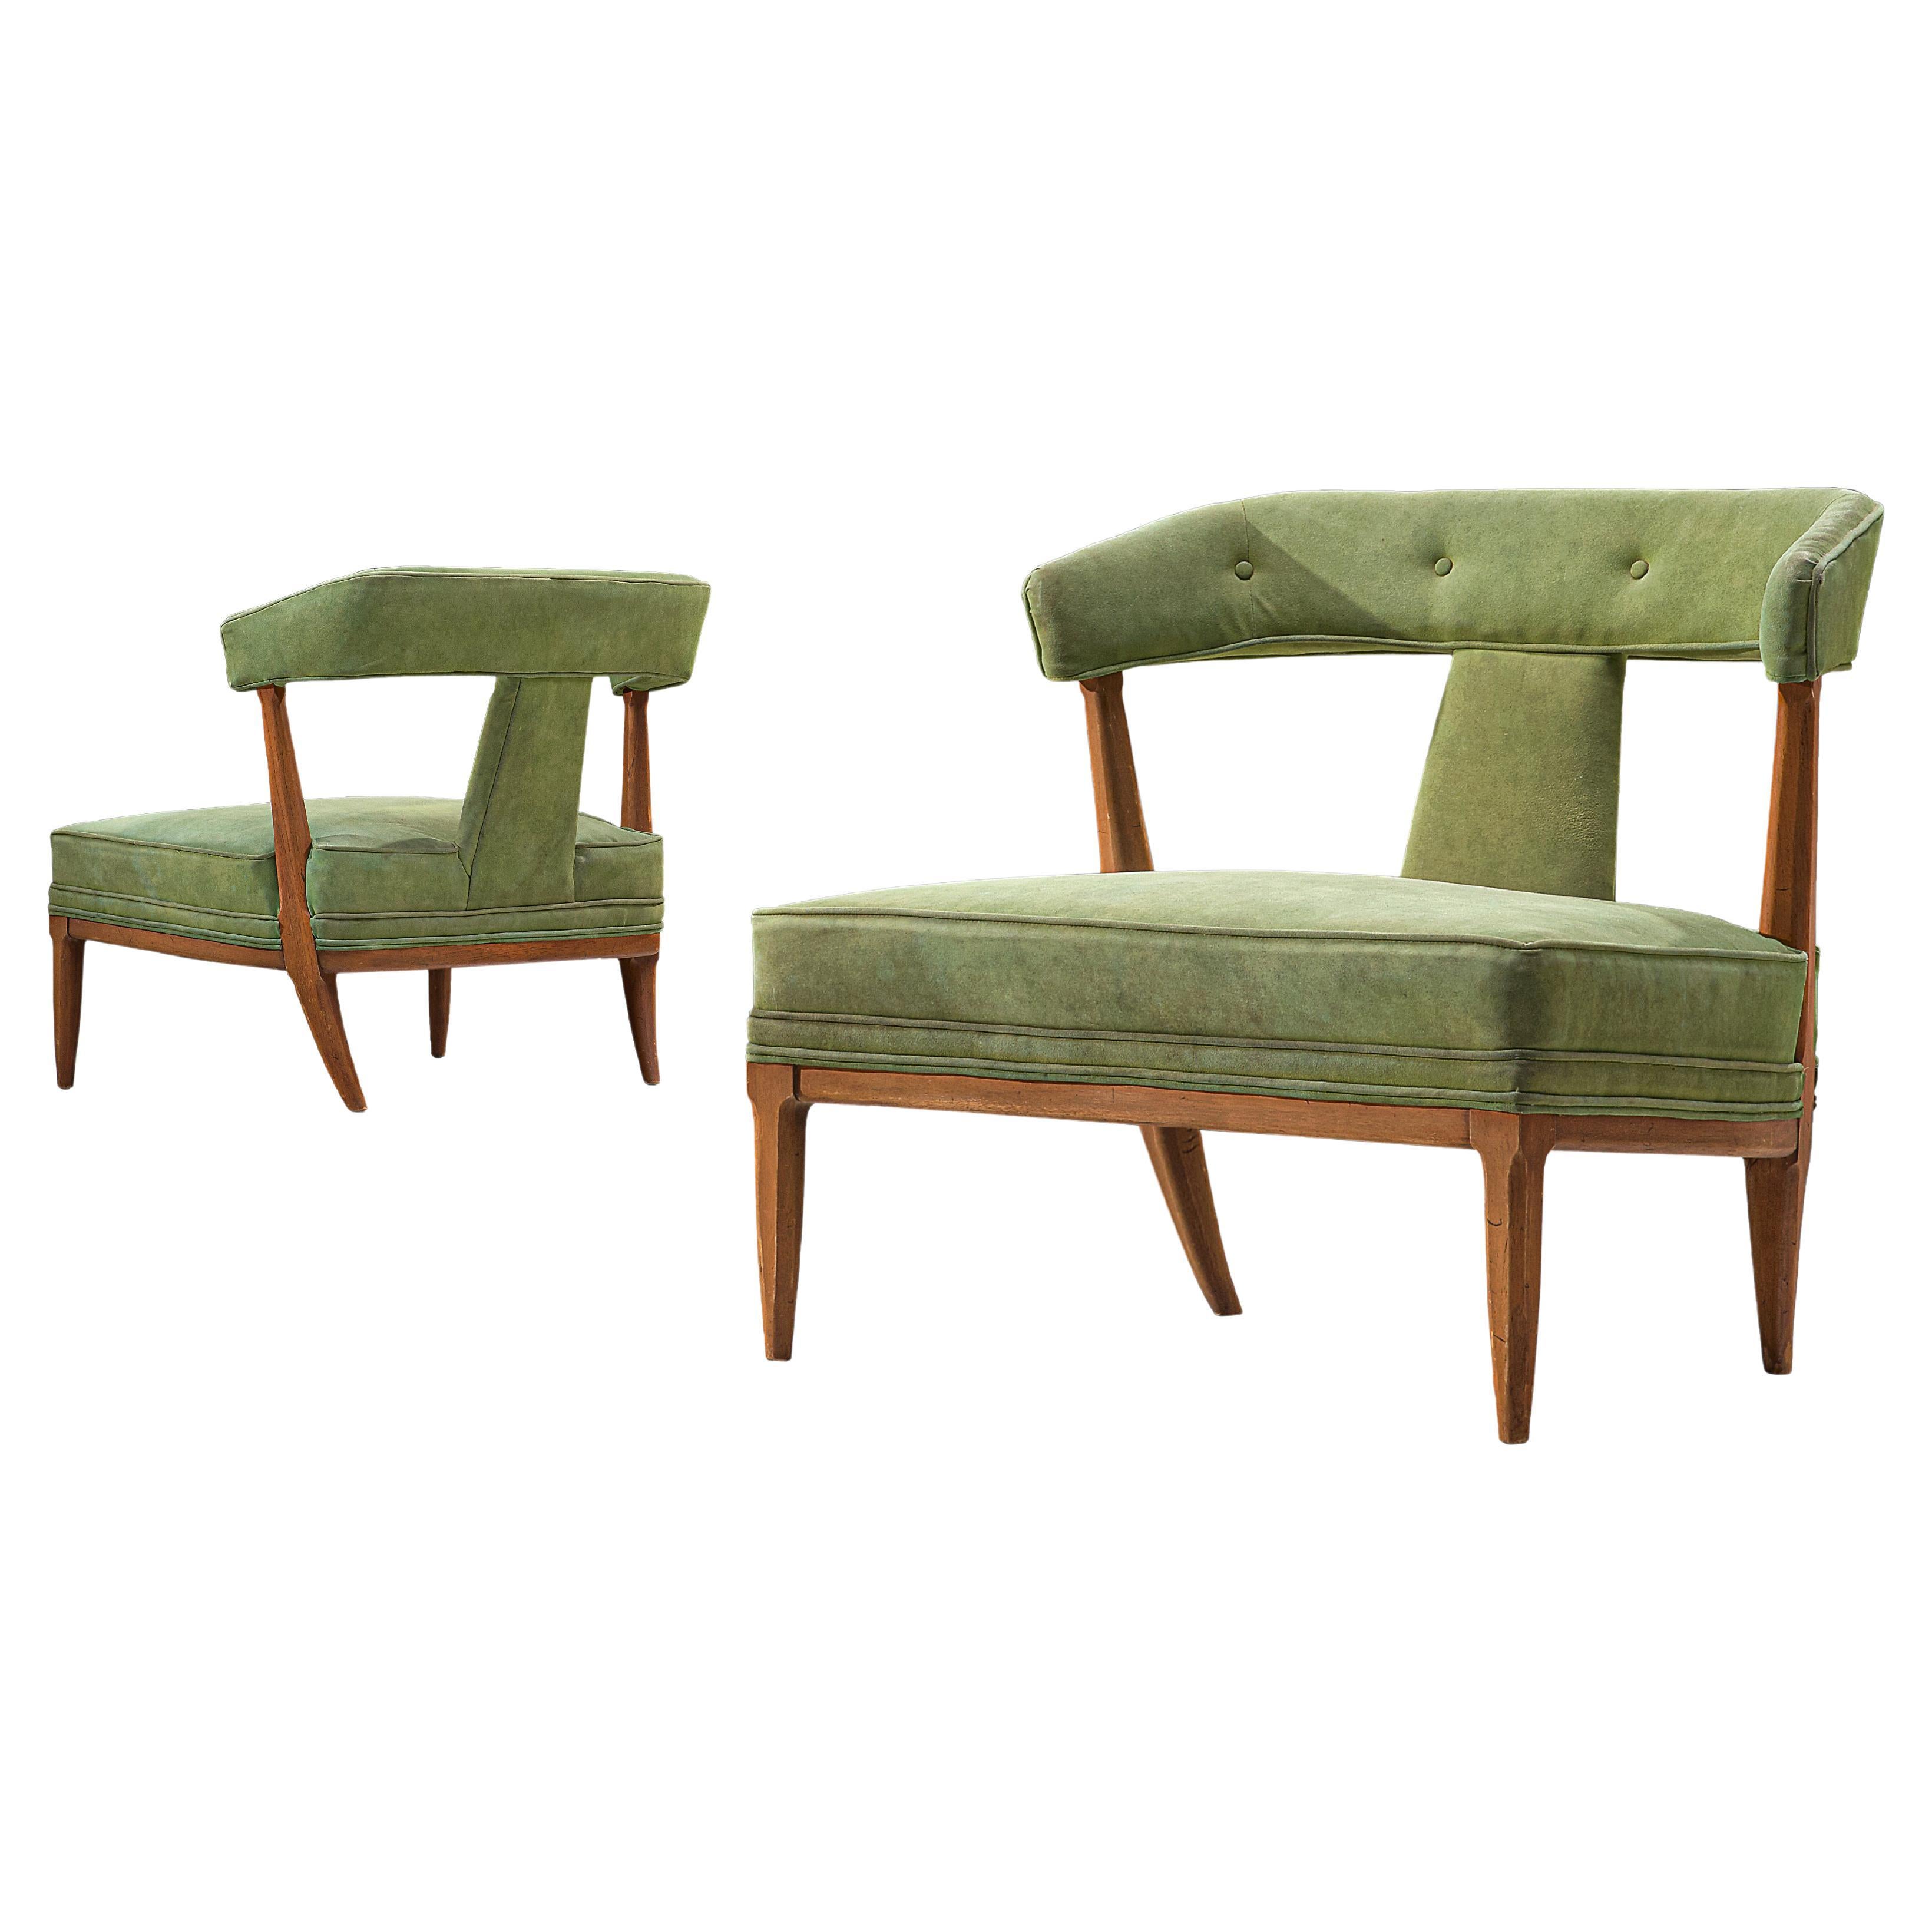 Pair of Wide American Lounge Chairs in Beech and Green Upholstery